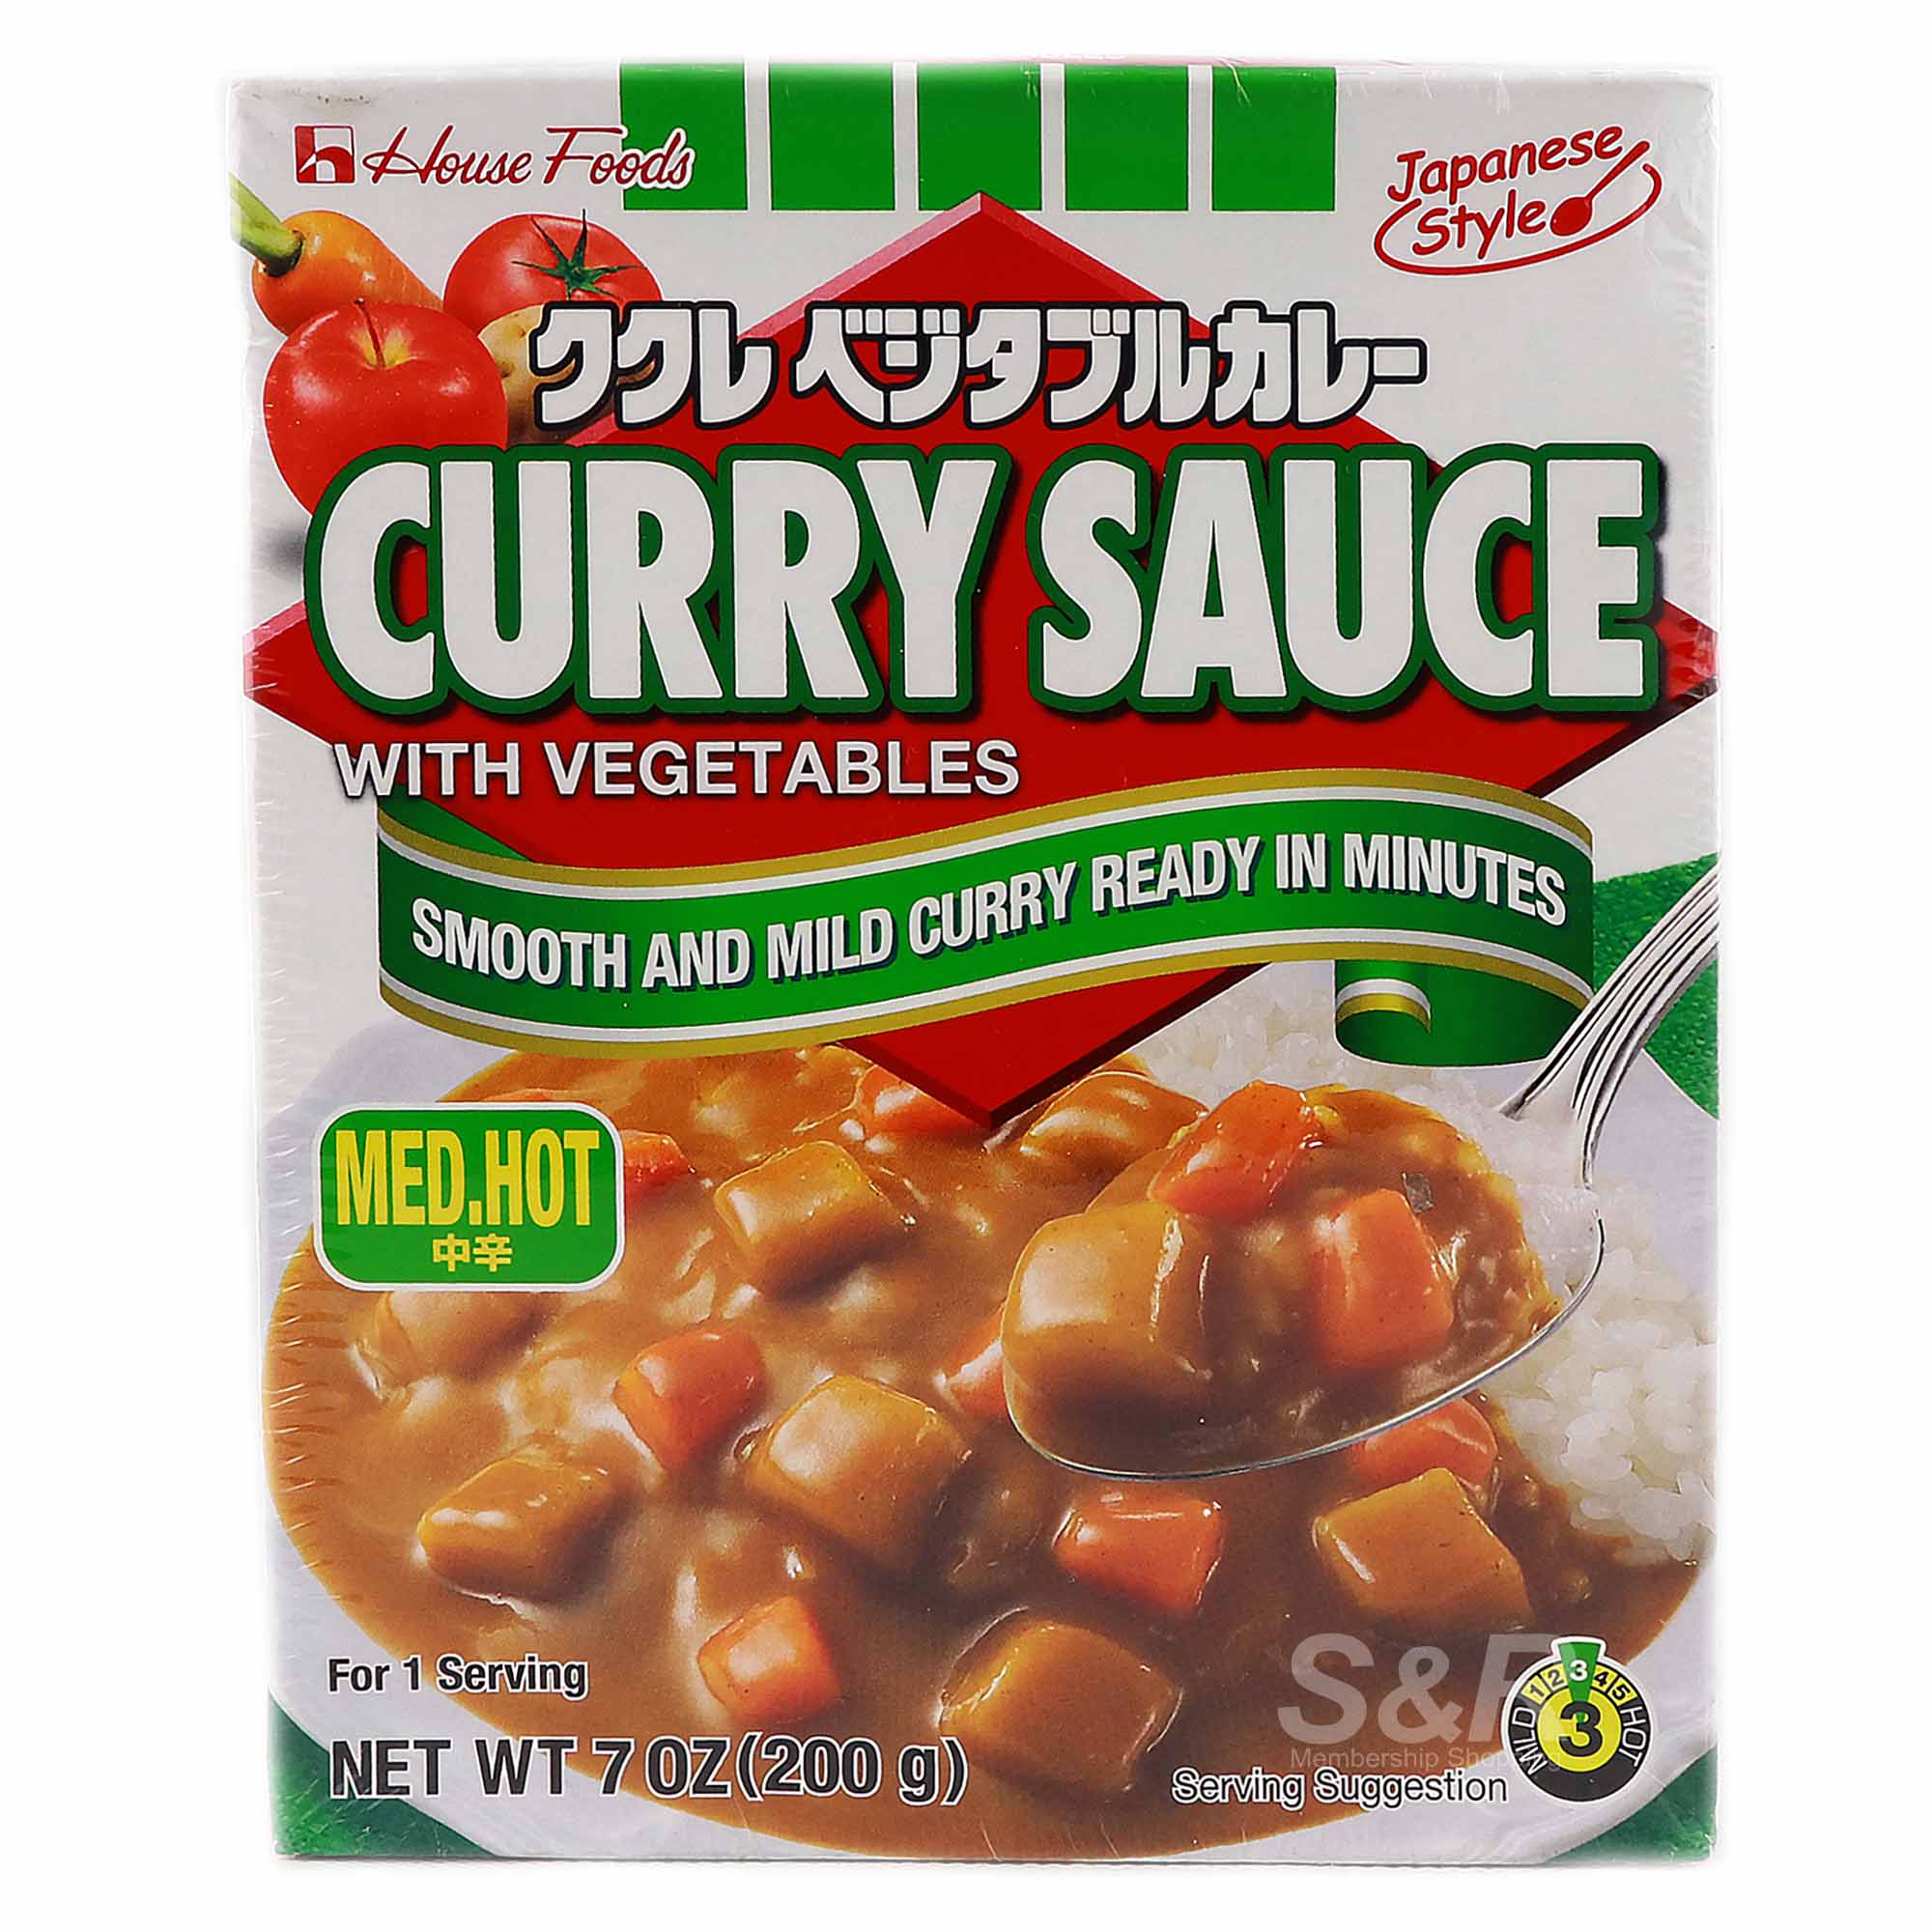 House Foods Japanese Style Curry Sauce Medium Hot 2 boxes